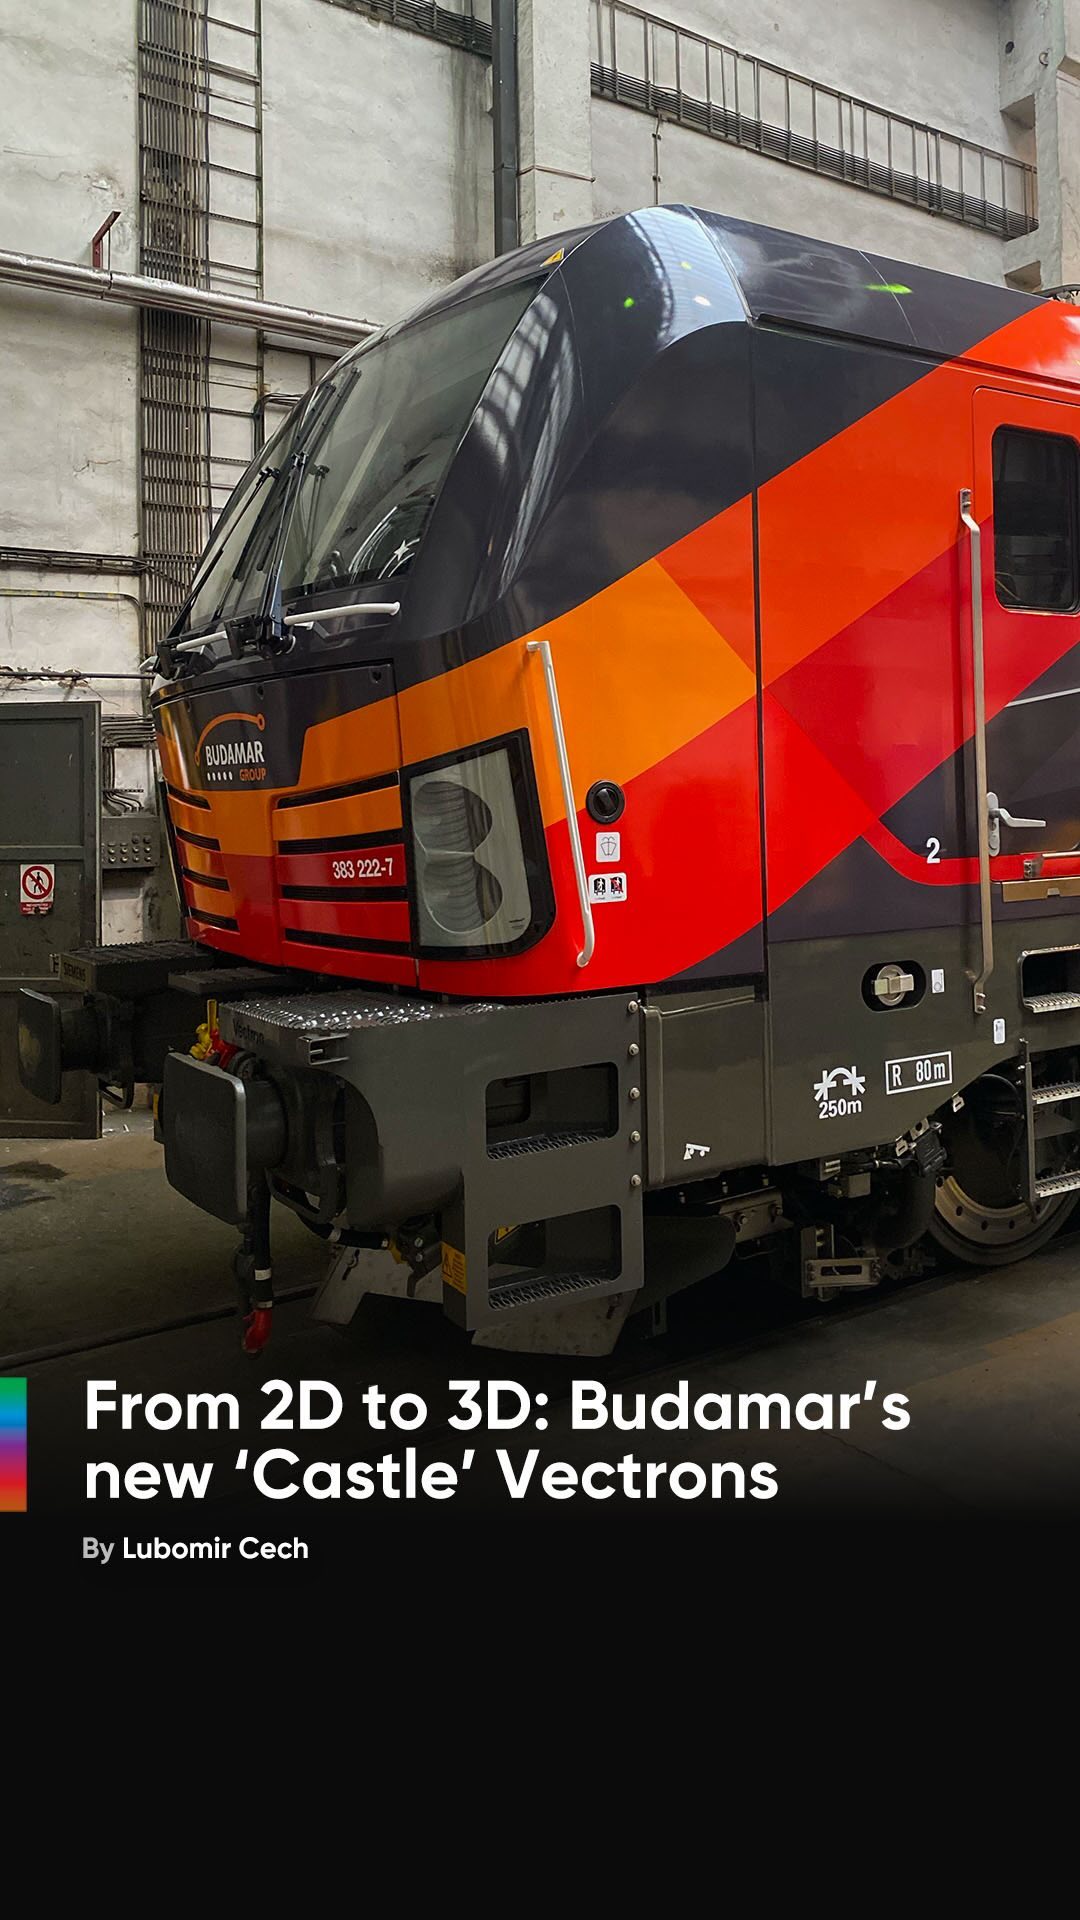 📷 by Lubomir Cech 🇸🇰 From 2D to 3D: Budamar’s new ‘Castle’ series Vectrons are out! 🔥 Livery by @railcolor.design 🎨 #siemens #siemensvectron #vectron #Vectron383 #383222 #budamar #budamargroup #oravskyhrad #ellok #locomotive #electriclocomotive #eisenbahnvideo #railwaysphotography #railways #railways_of_our_world #railways_of_europe #visitslovakia #bratislava #reel #trainreels